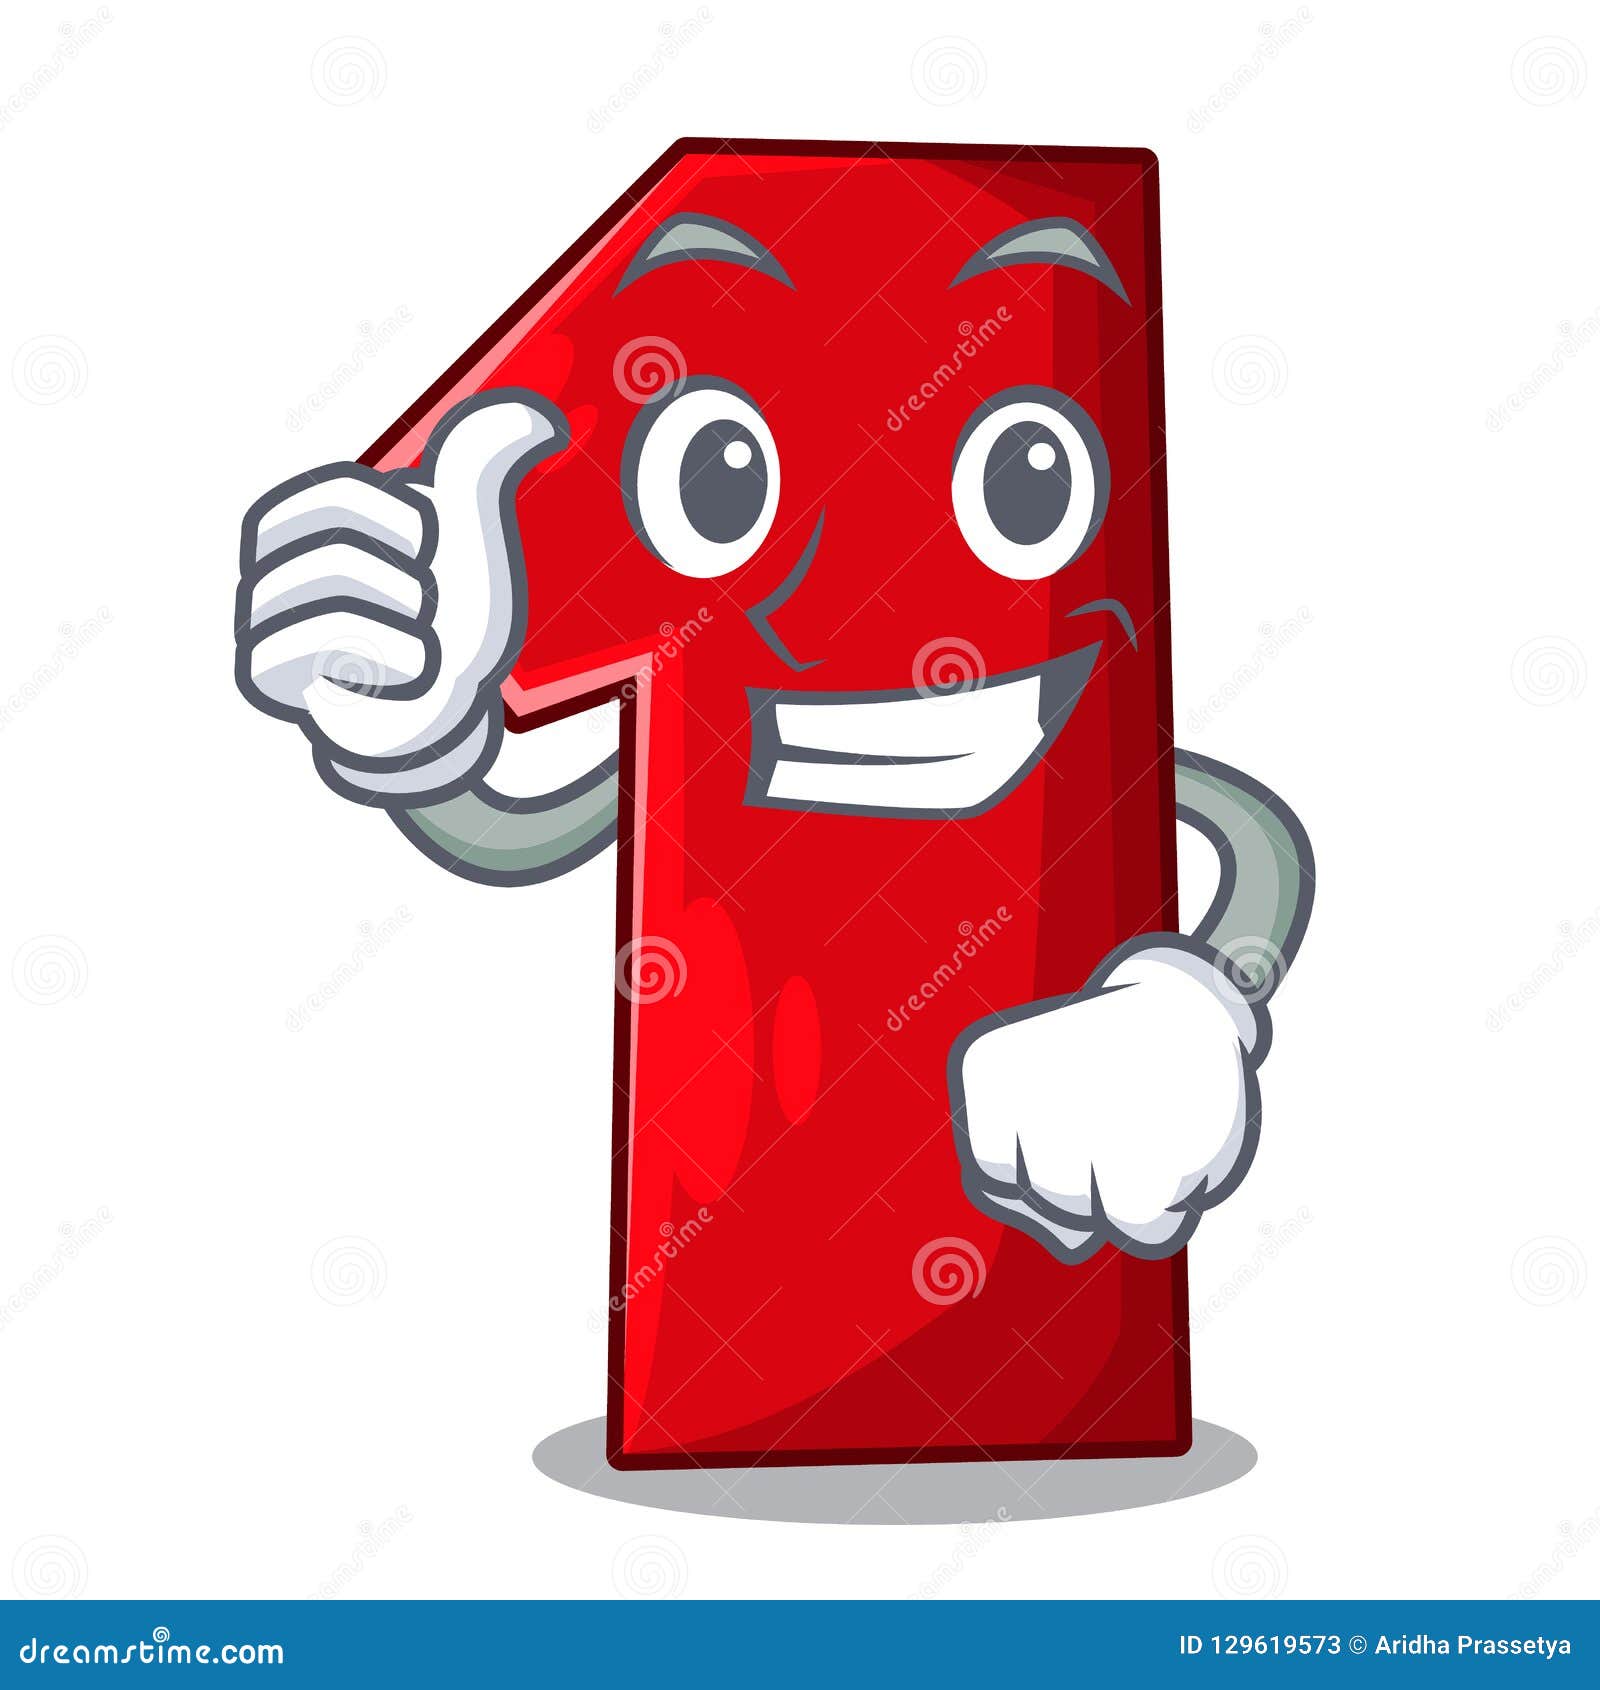 Thumbs Up Number One Index Finger on Cartoon Stock Vector ...